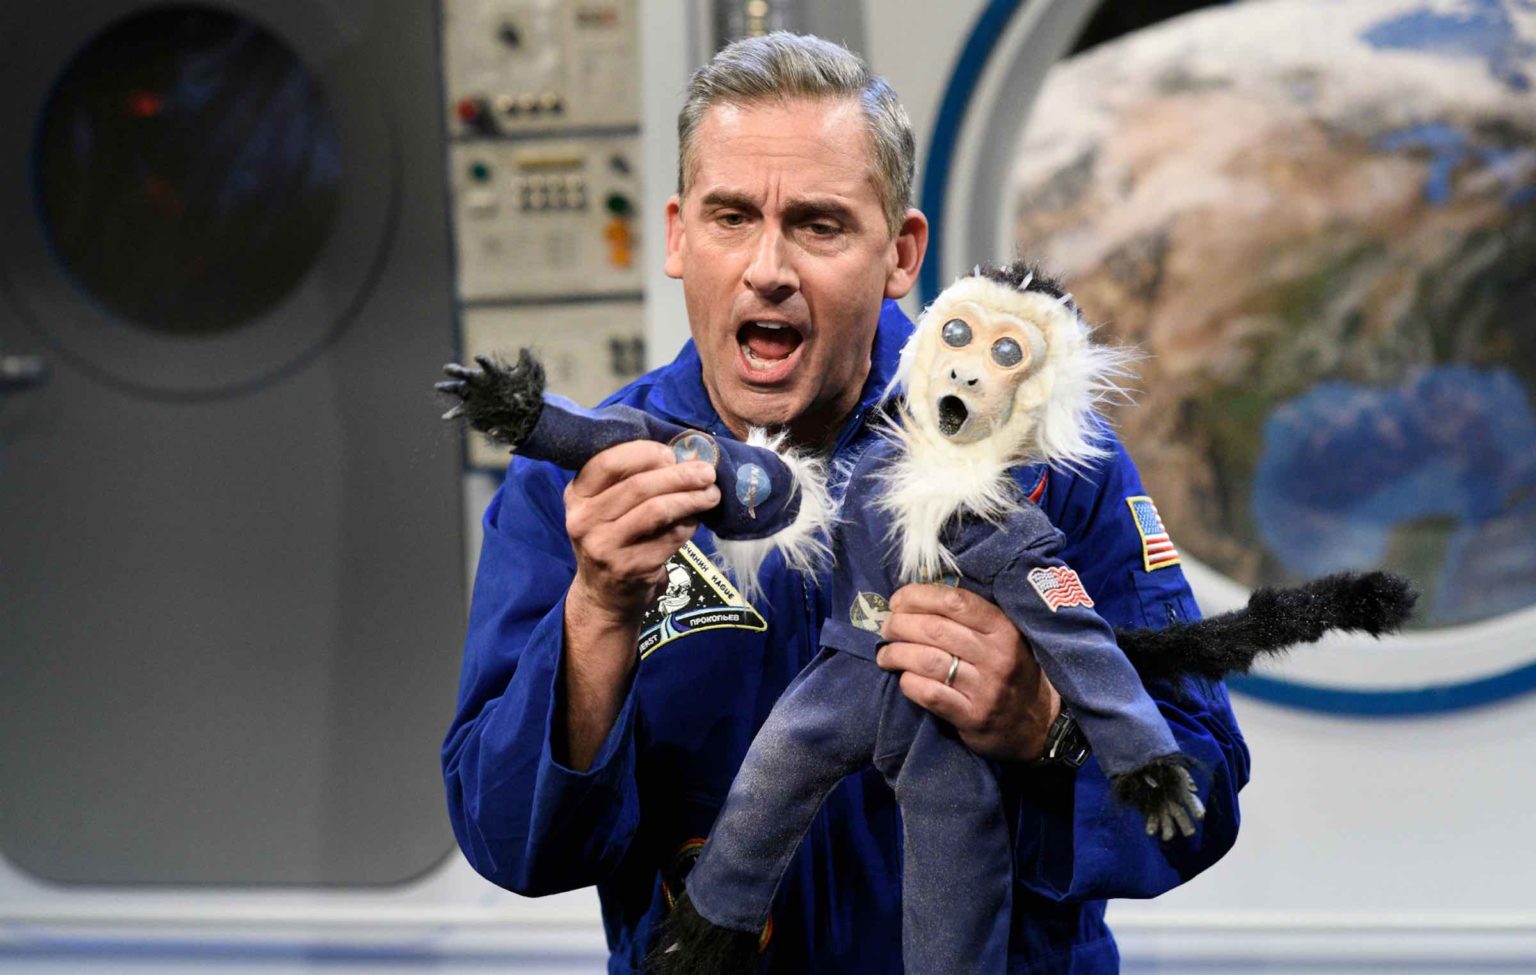 'Space Force' on Netflix is going to premiere in just a couple of weeks. Here’s what you need to know about Steve Carell and 'Space Force'.